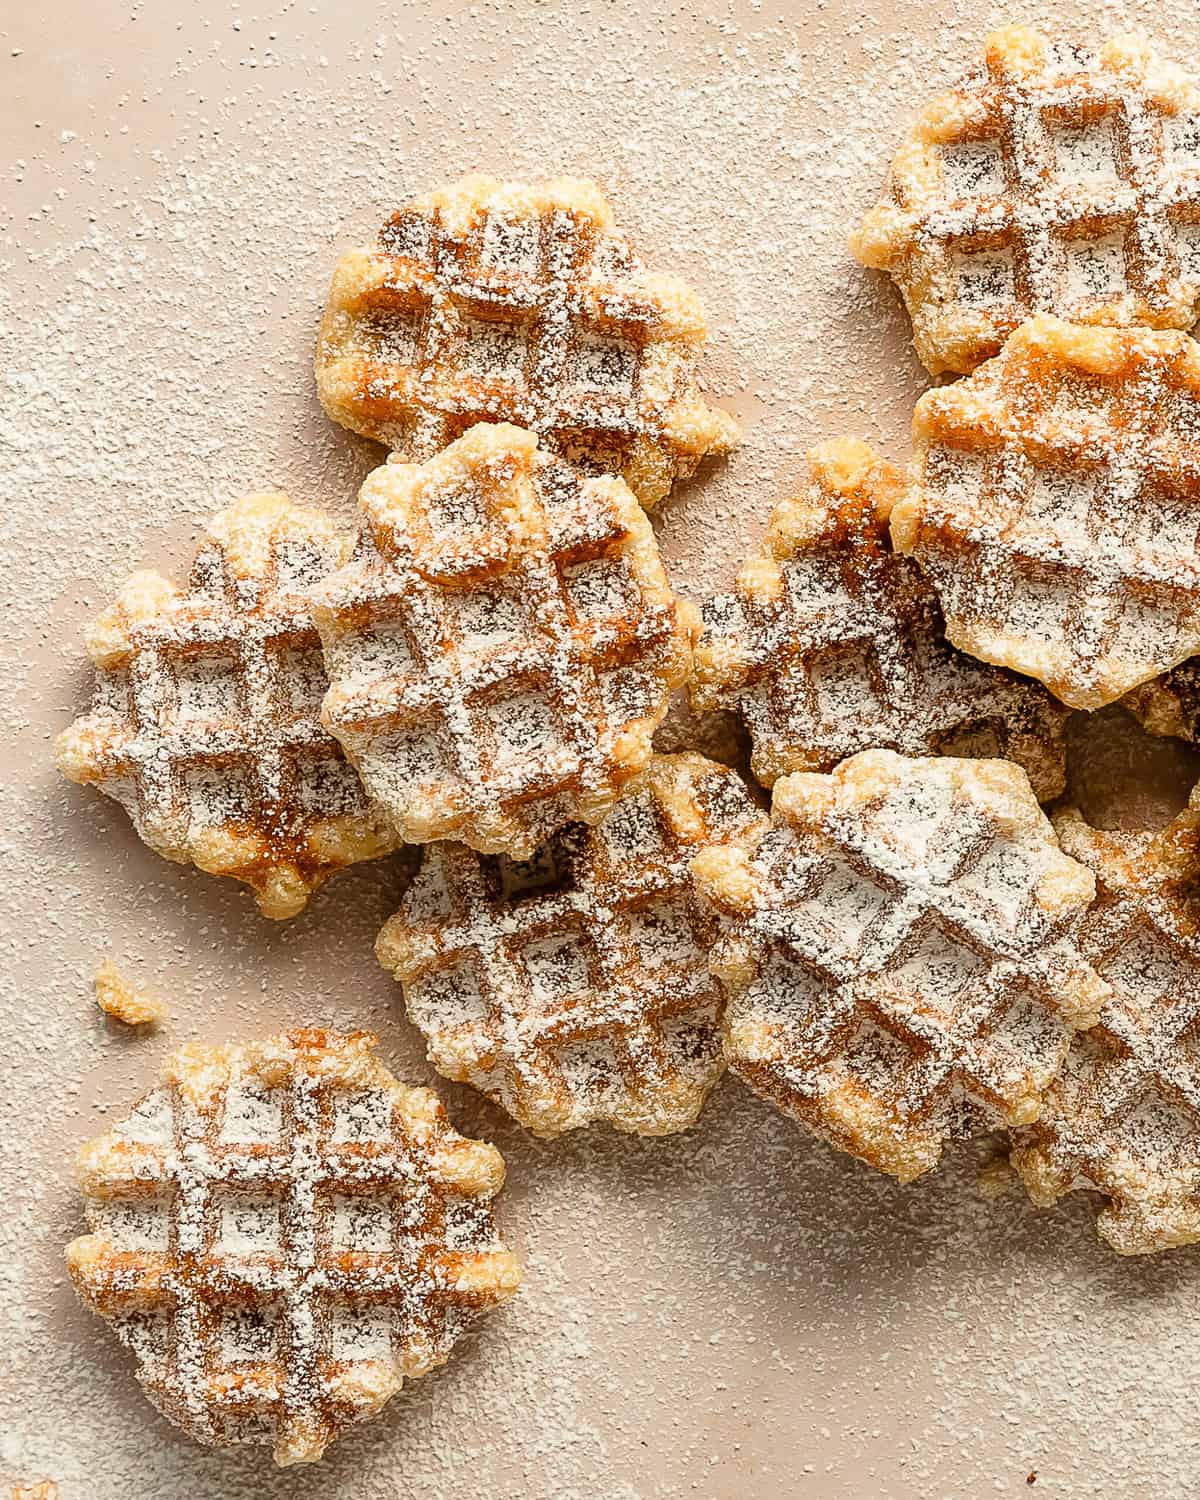 Waffle cookies area classic buttery vanilla sugar cookie cooked on a waffle iron. These easy cookie waffles have a soft buttery interior with a crisp golden brown exterior. What I love most about these fun and unique dutch waffle cookies is they are no chill and all you need to baked them is a waffle iron. 